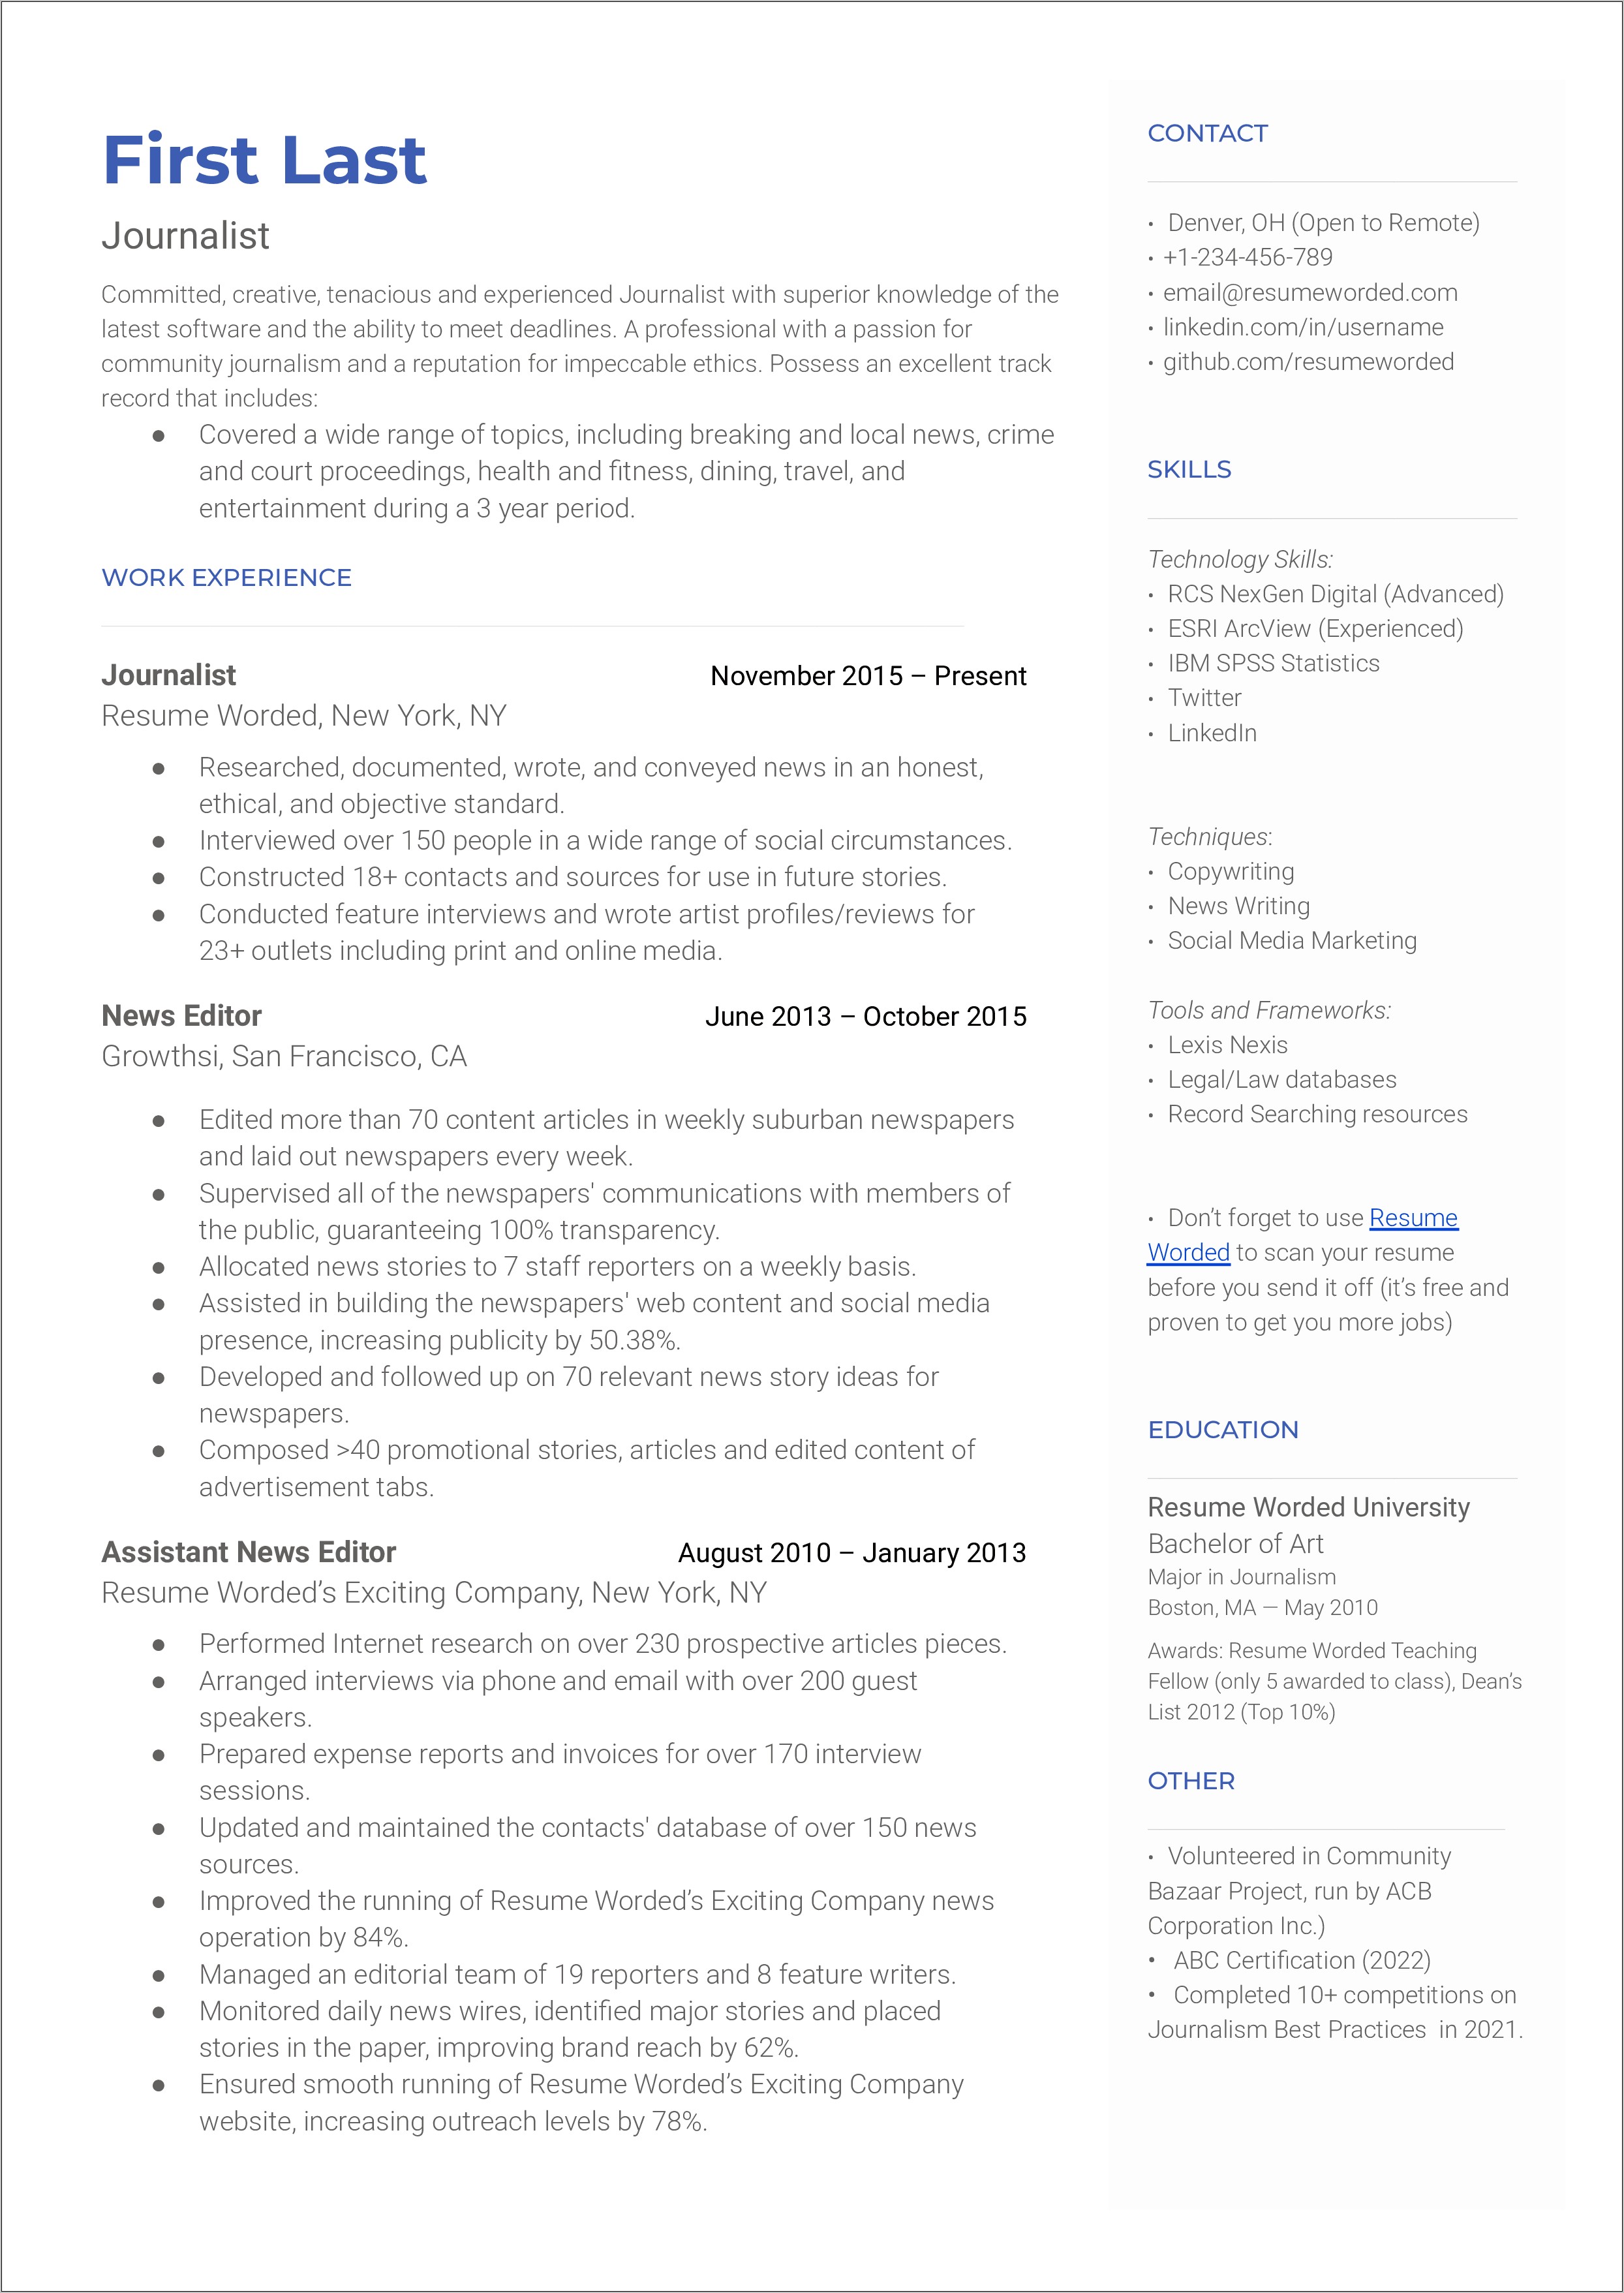 General Resume Objective Examples Journalism